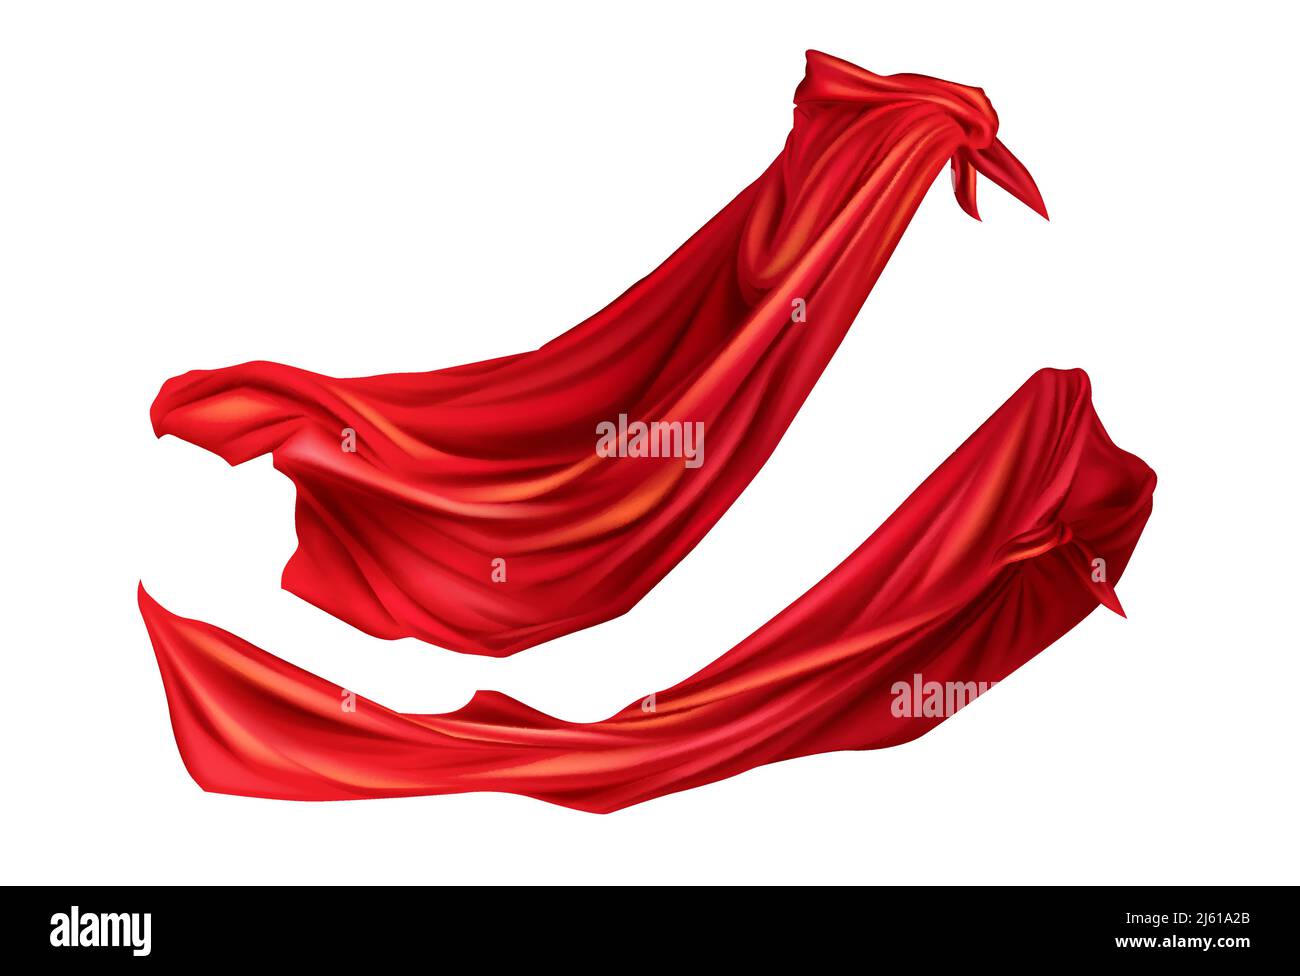 Red cloaks superhero costume with hoods set. Silk flattering capes side view on different positions isolated on white background. Carnival, masquerade Stock Vector